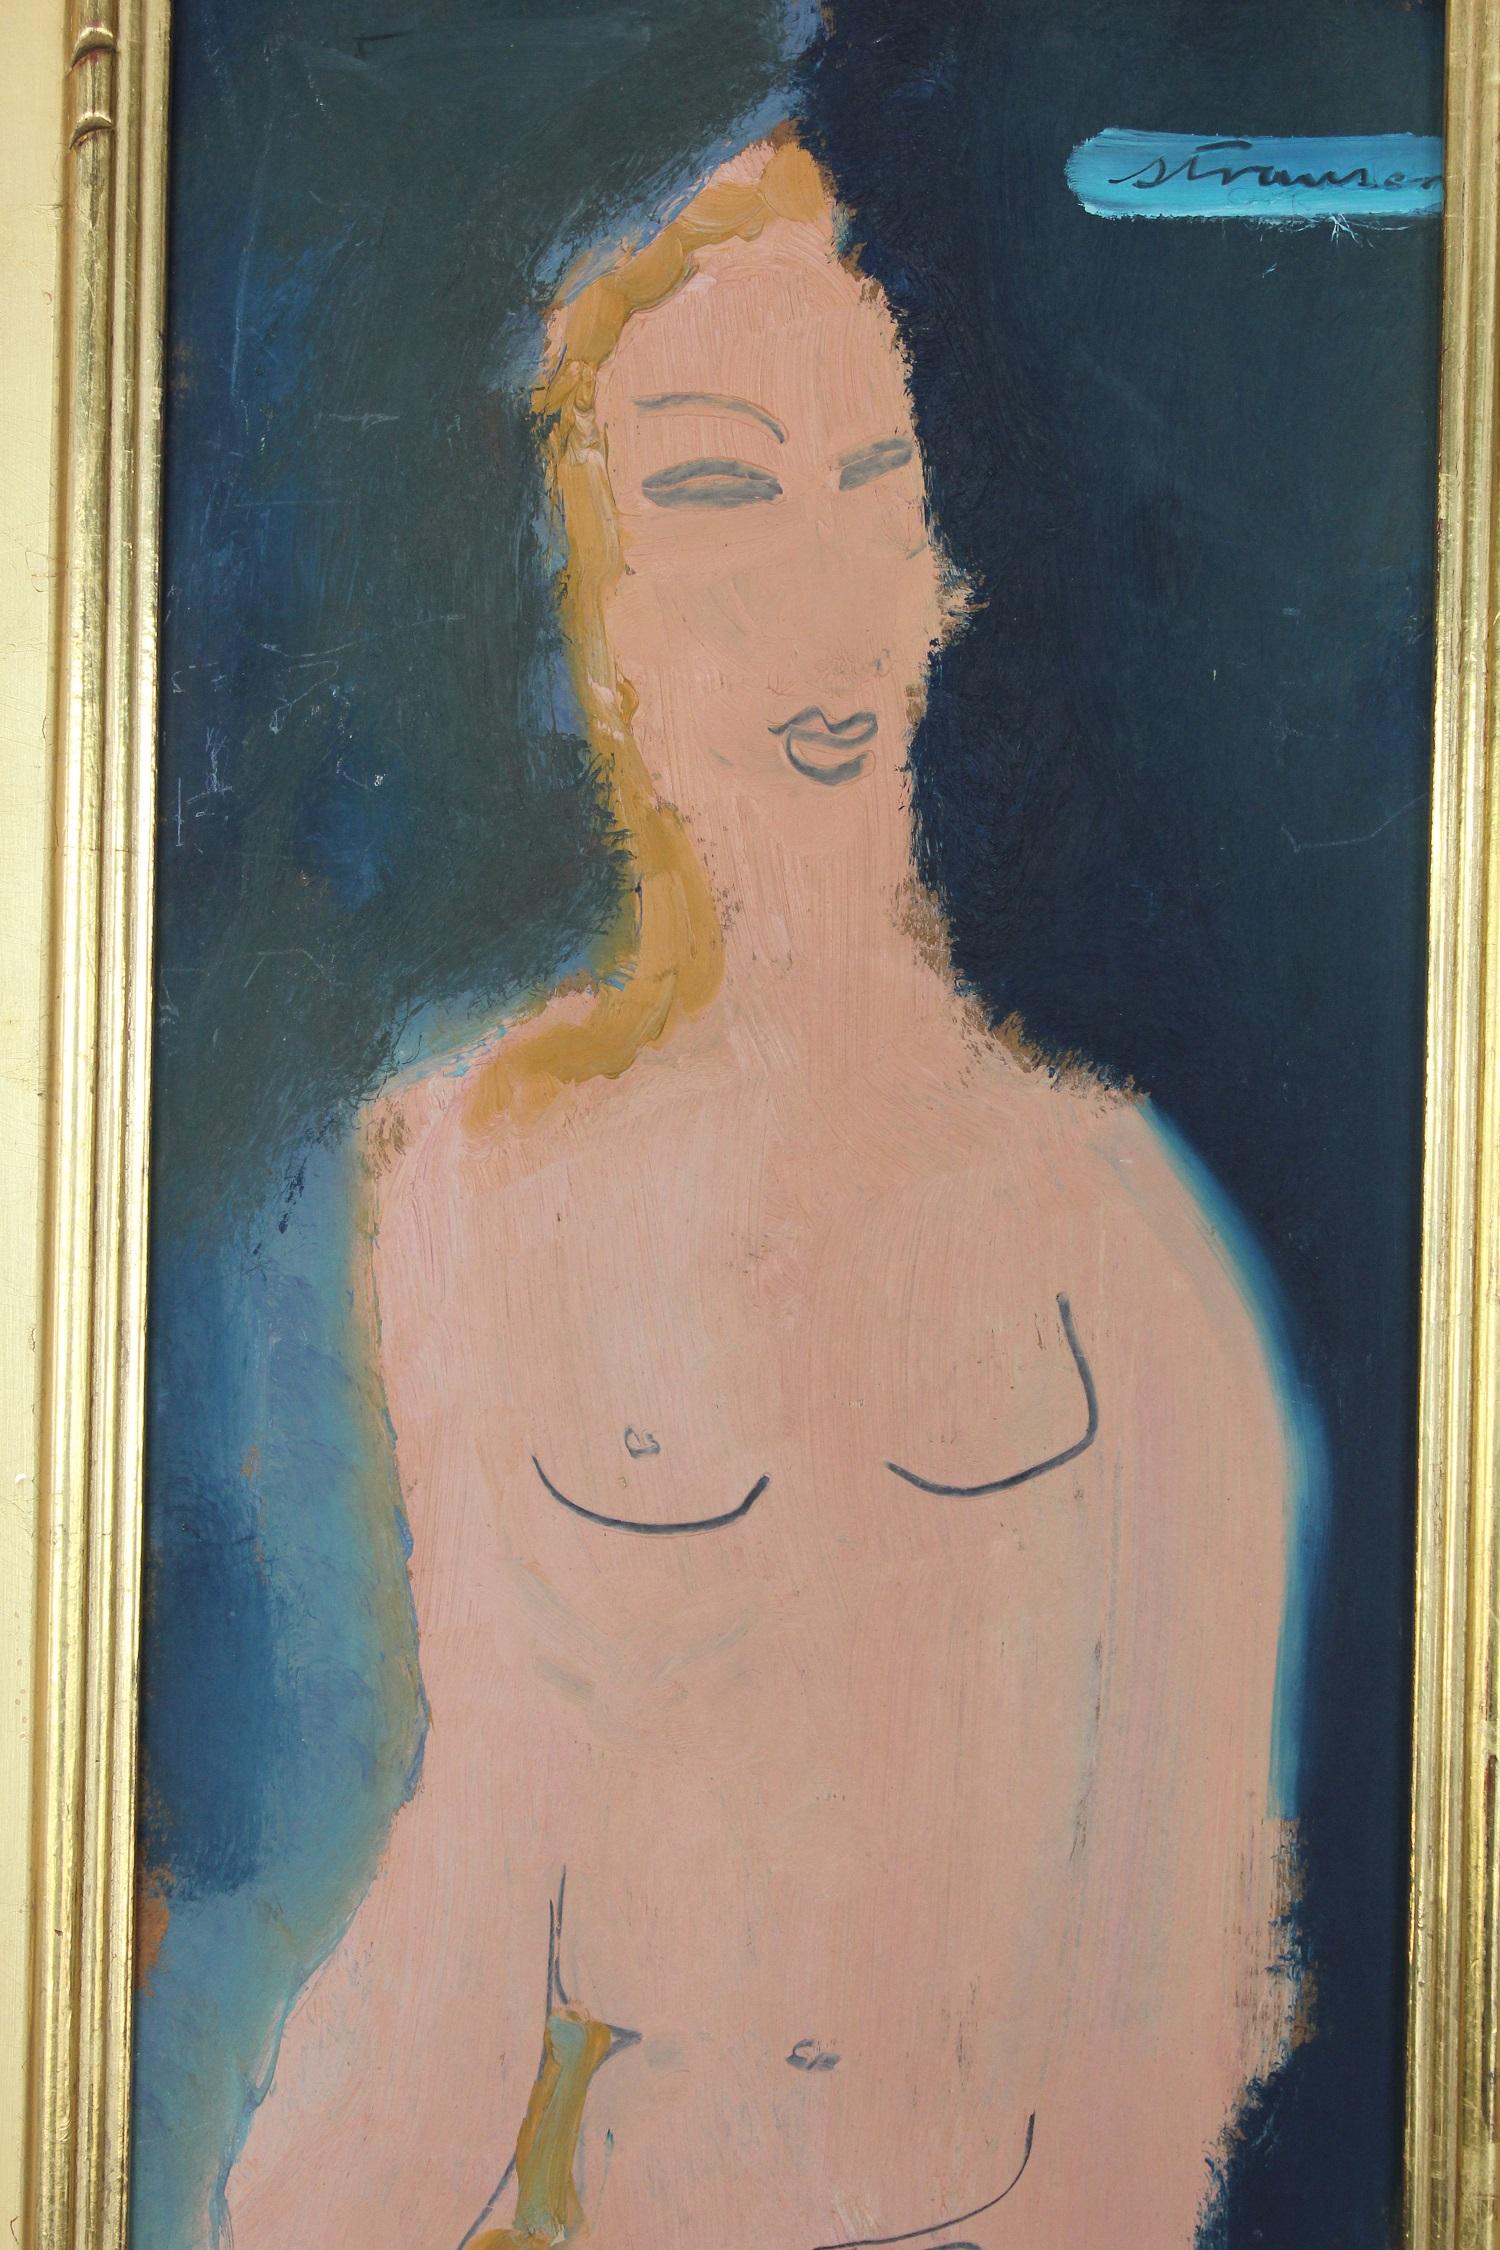 Midcentury abstract figure oil painting by Sterling Boyd Strauser 1907-1995. Painted on board and framed in 22-karat gold leaf hand carved frame. Measures: Frame H 32